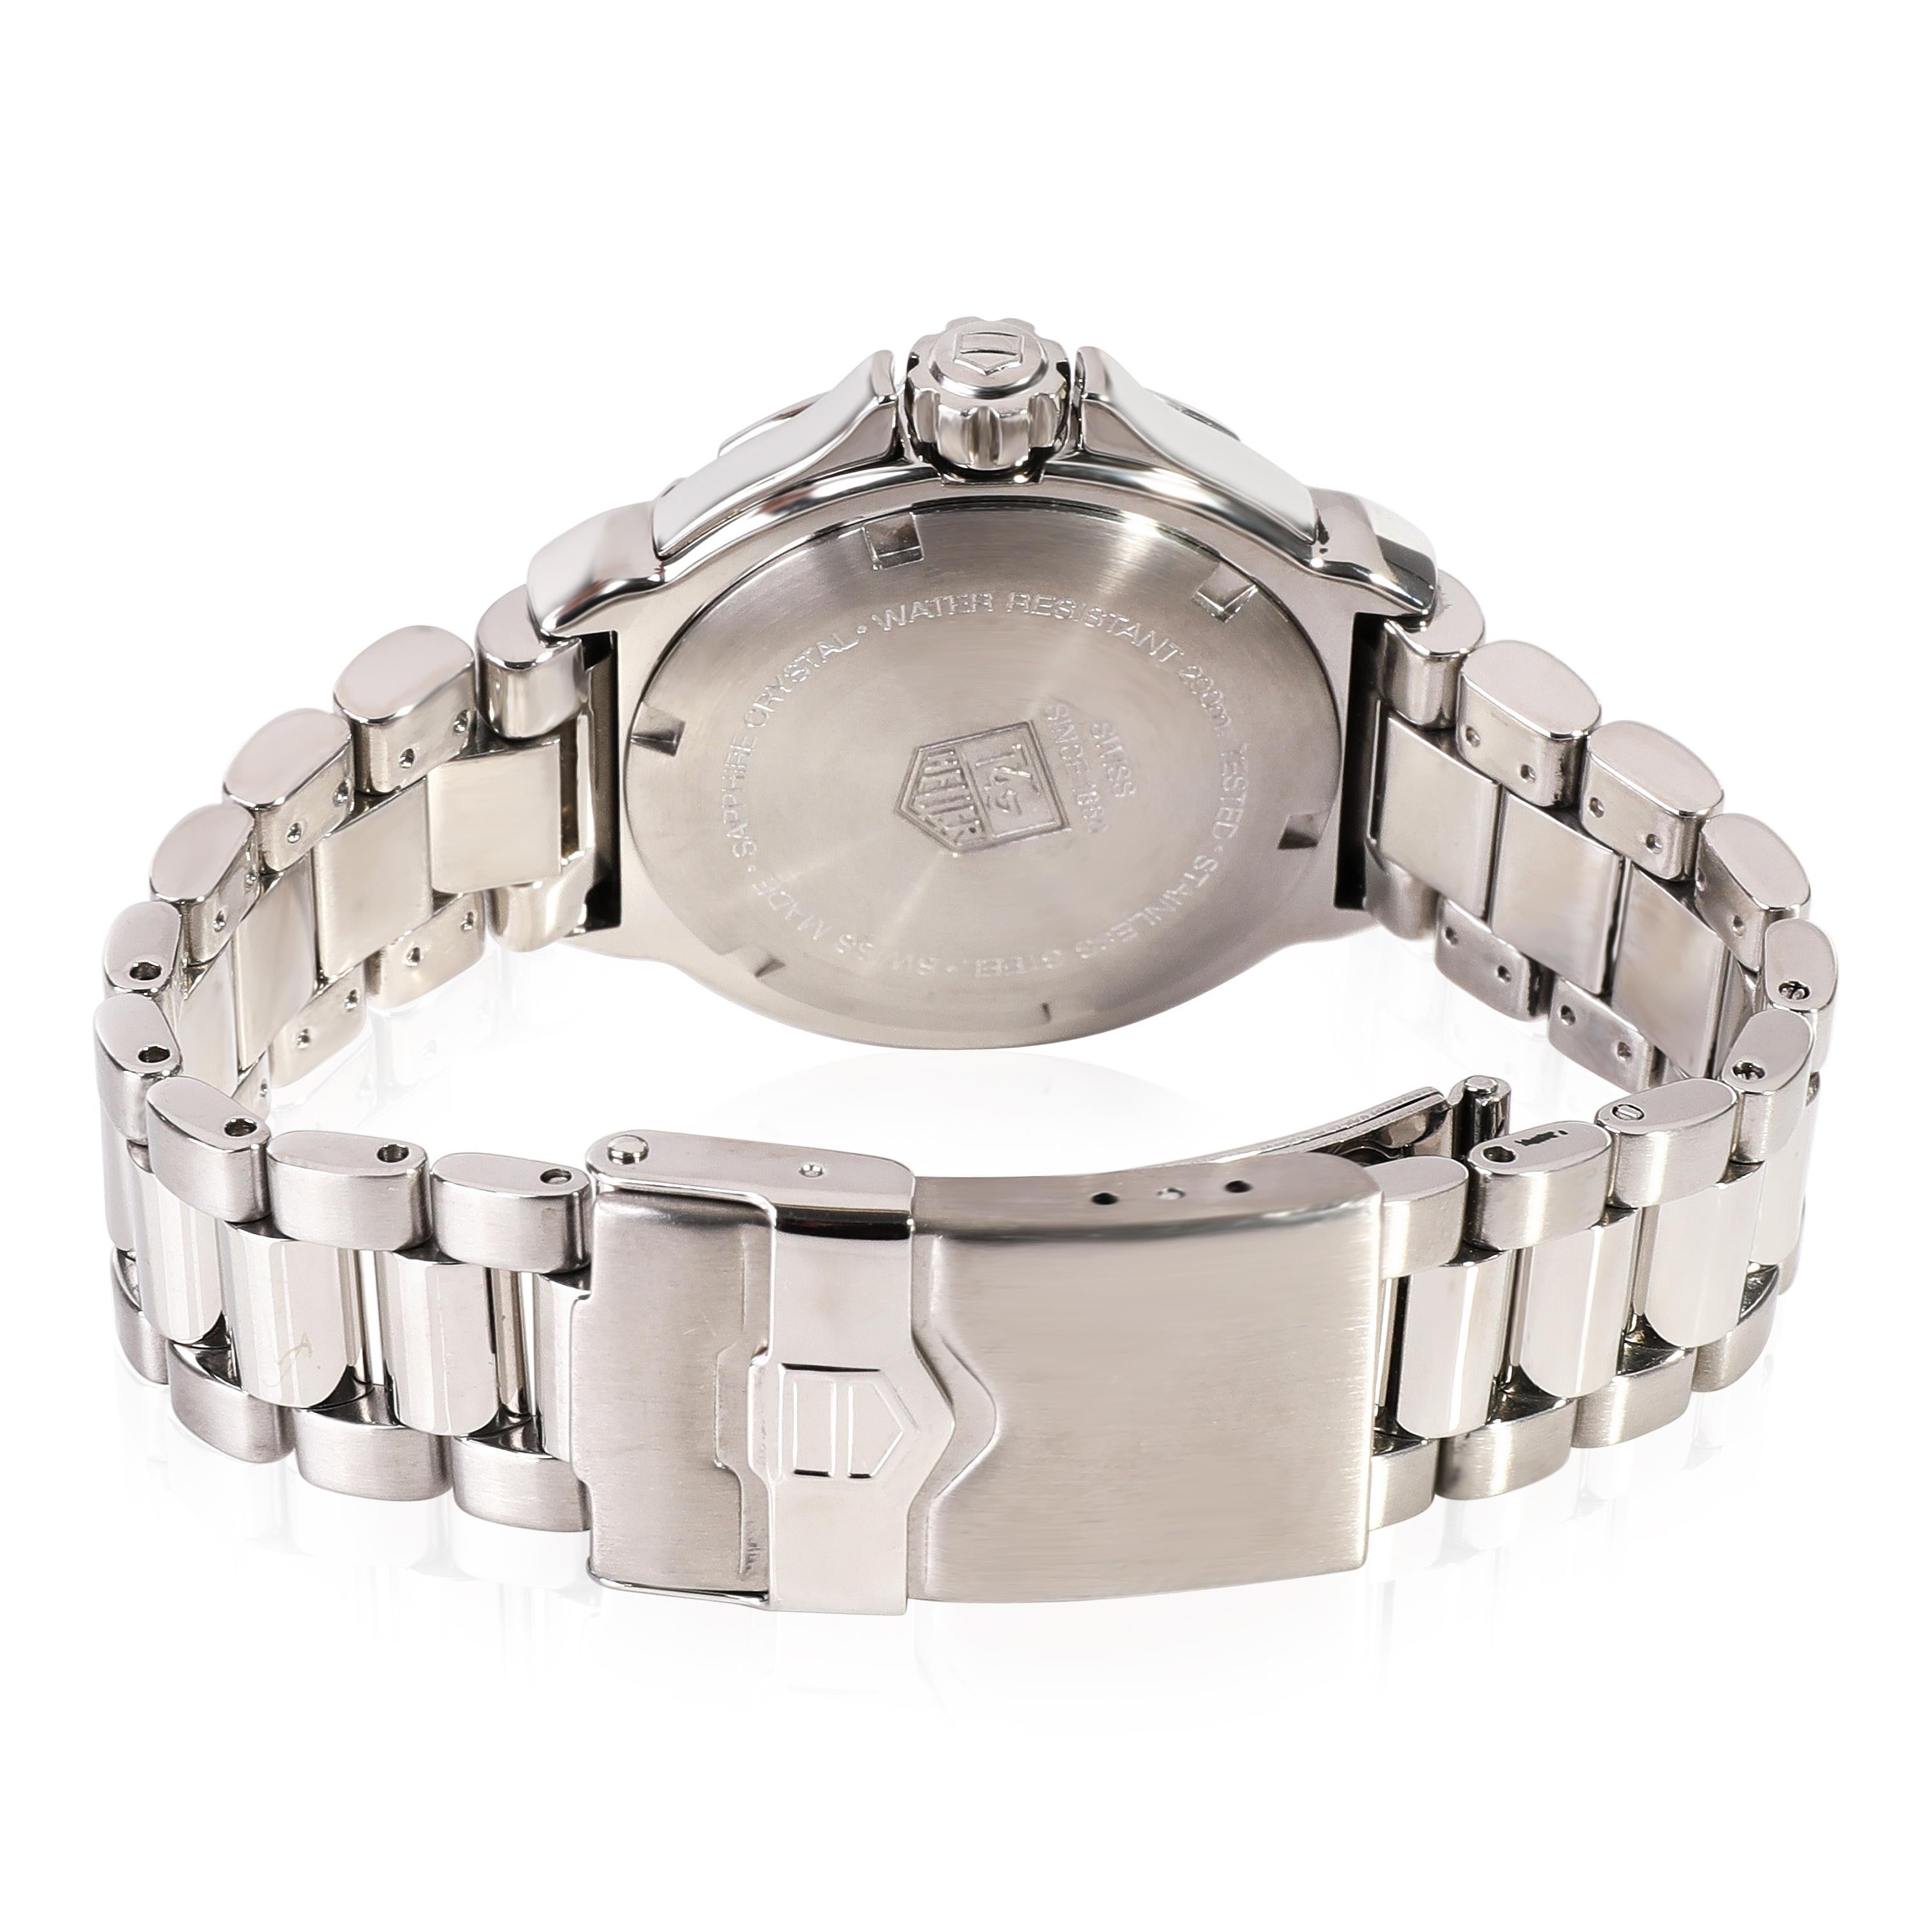 Tag Heuer Formula 1 WAC1214.BA0852 Women's Watch in  Stainless Steel

SKU: 111804

PRIMARY DETAILS
Brand: Tag Heuer
Model: Formula 1
Country of Origin: Switzerland
Movement Type: Quartz: Battery
Year of Manufacture: 2010-2019
Condition: Retail price